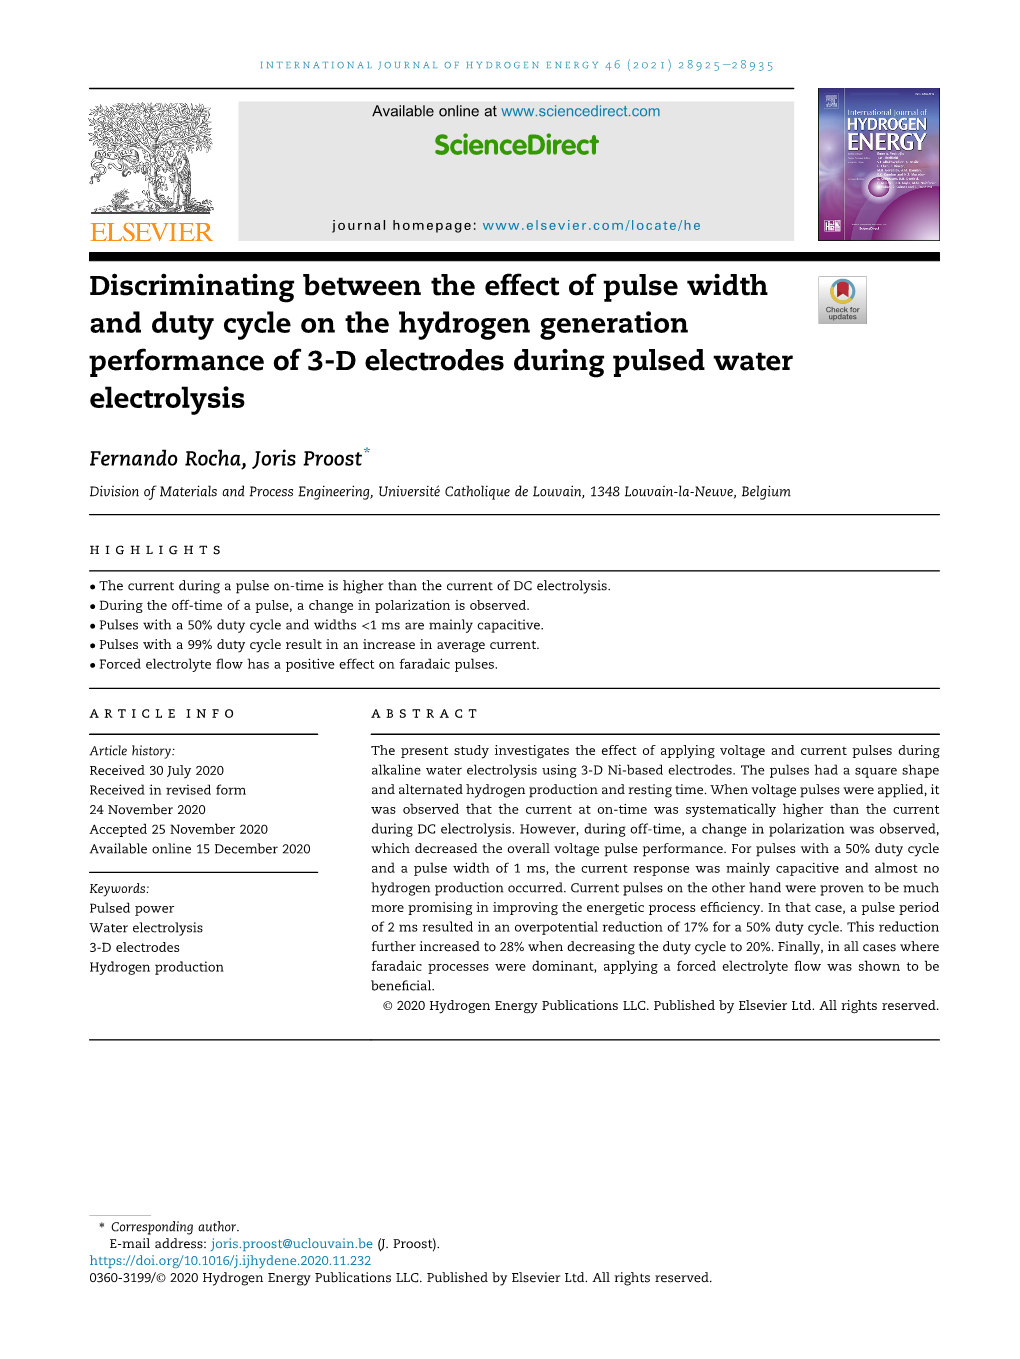 Discriminating Between the Effect of Pulse Width and Duty Cycle on the Hydrogen Generation Performance of 3-D Electrodes During Pulsed Water Electrolysis